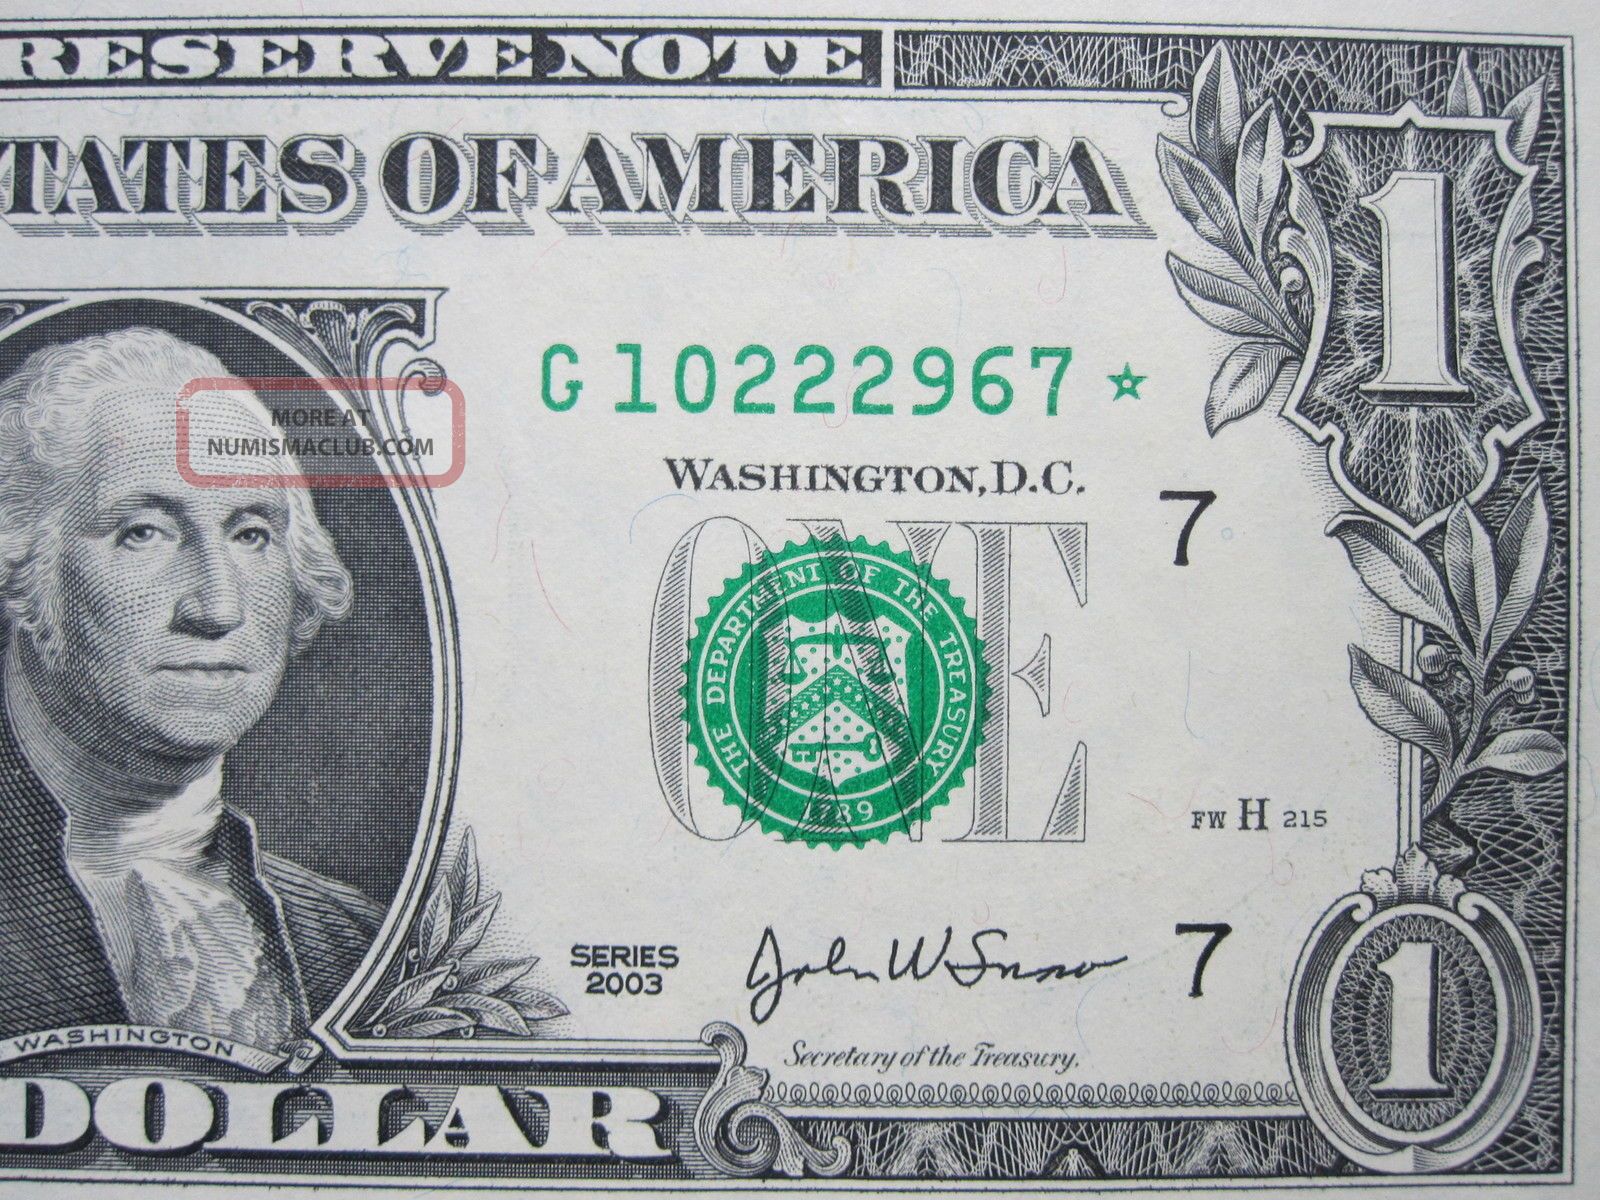 We Are Top Buyers of Old Currency In The U.S.A.